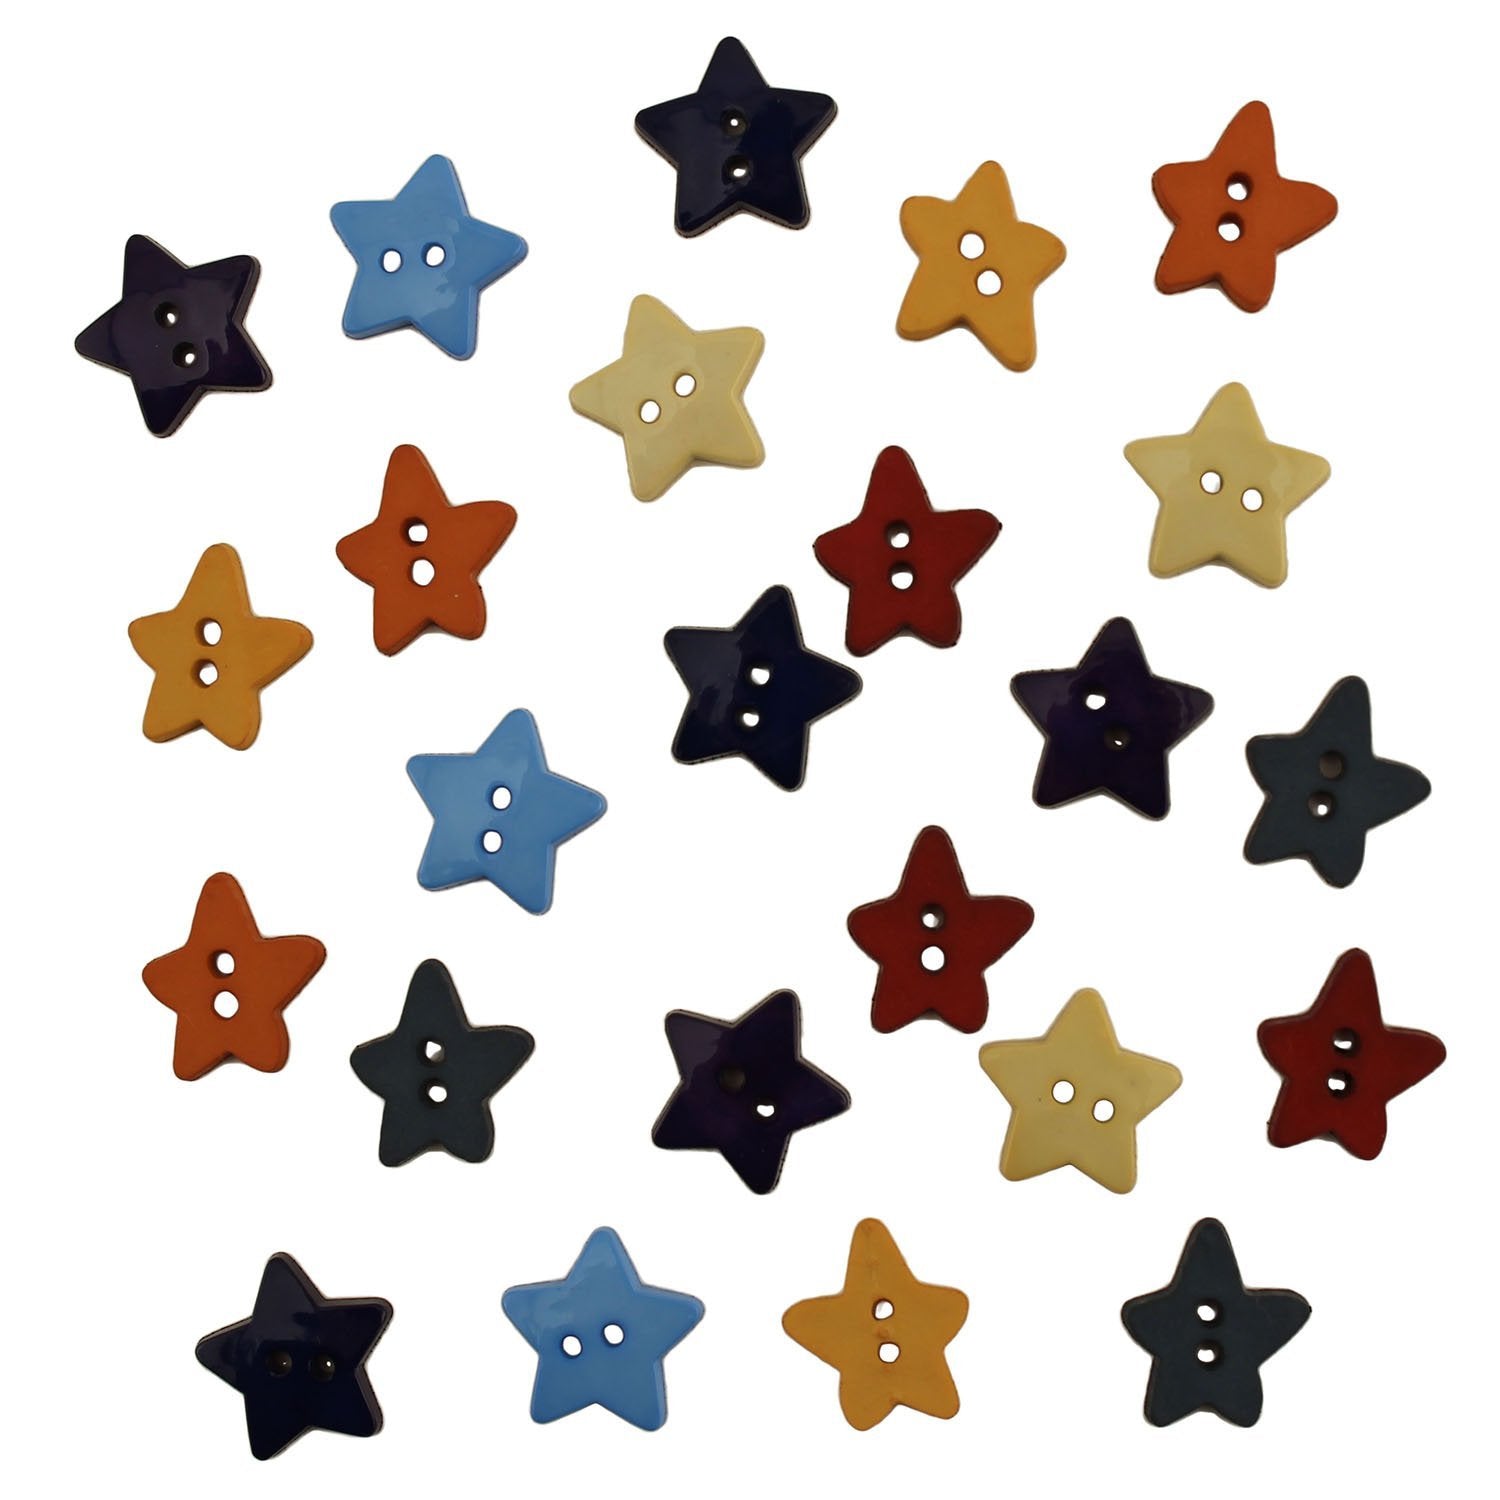 Buttons Galore Gold Stars Button Bag